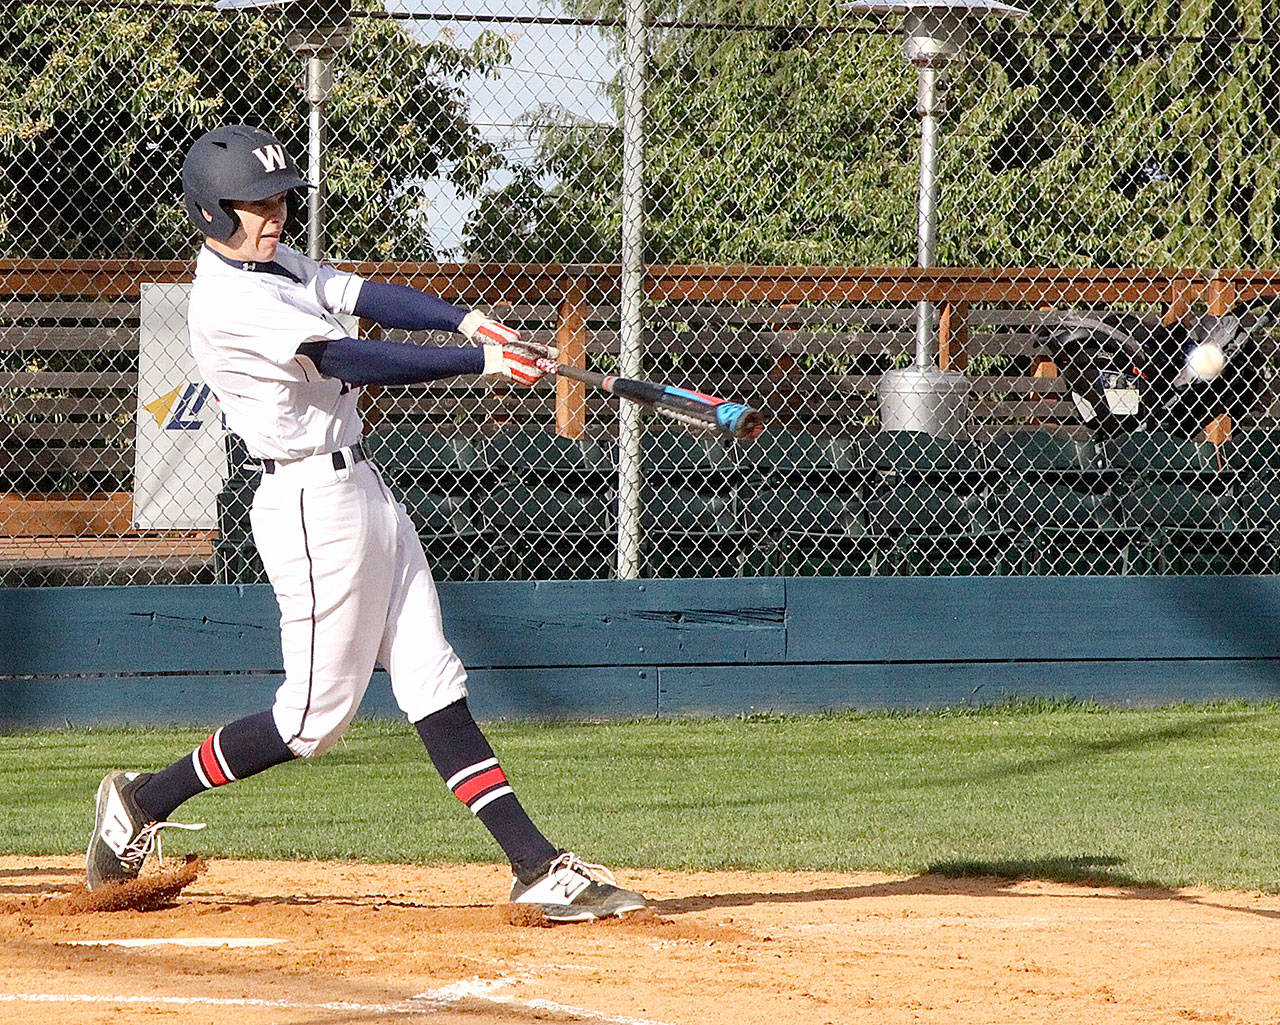 Wilder Senior’s Landon Seibel takes a cut in a game at Civic Field earlier this month. Wilder will host the Dick Brown Memorial Firecracker Classic at Civic Field beginning Thursday. (Dave Logan/for Peninsula Daily News)